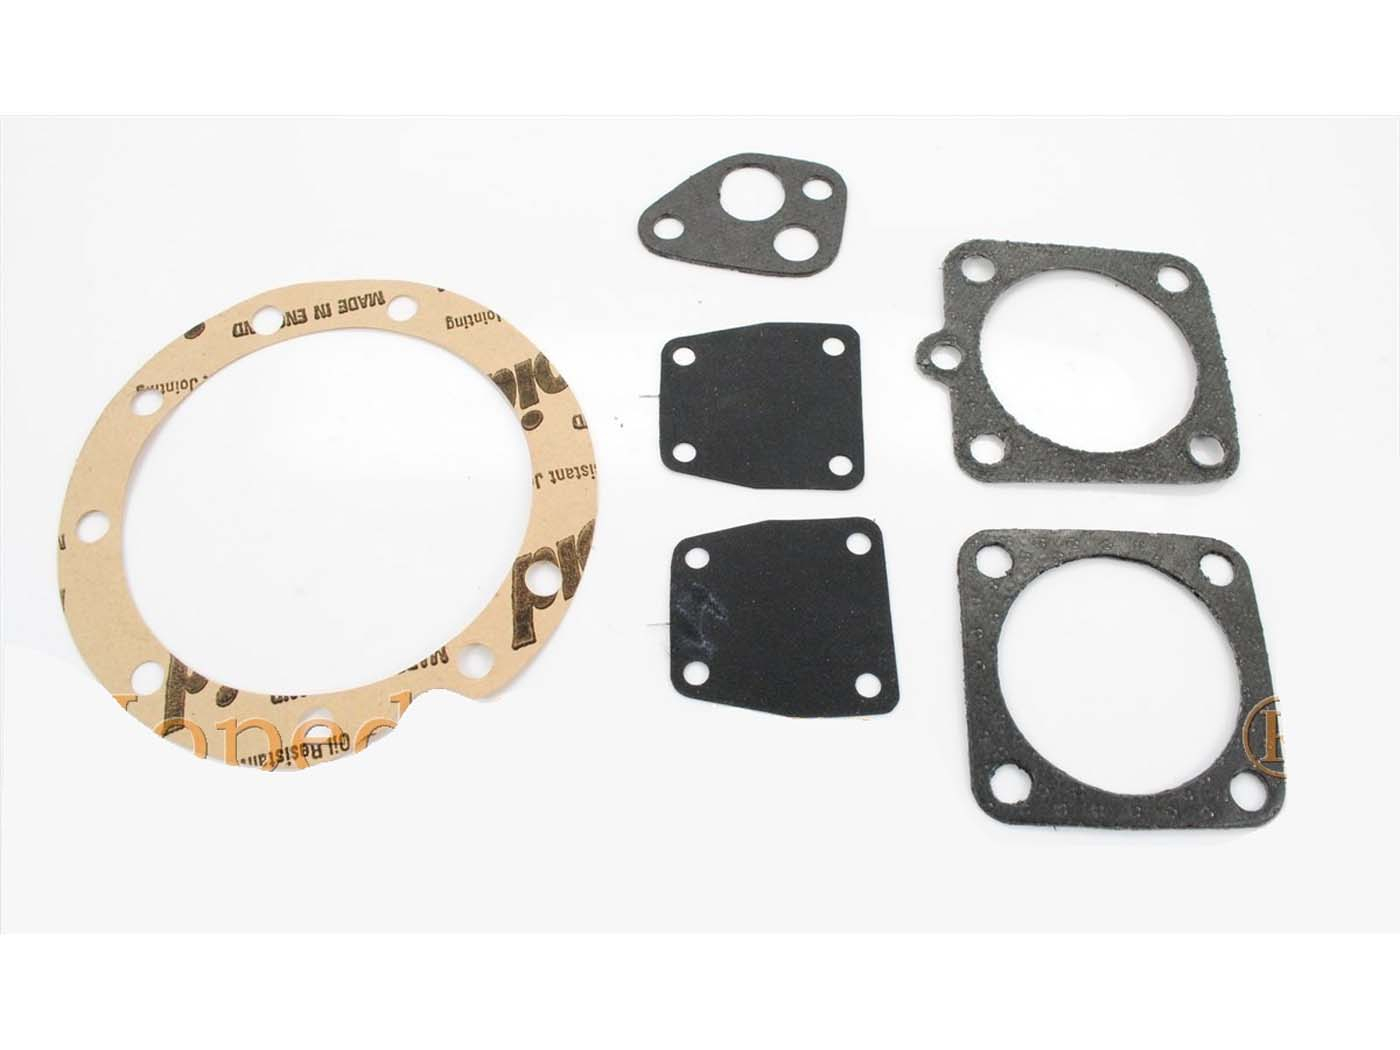 Engine Gasket Set Athena 6-piece For Velo Solex Moped Moped